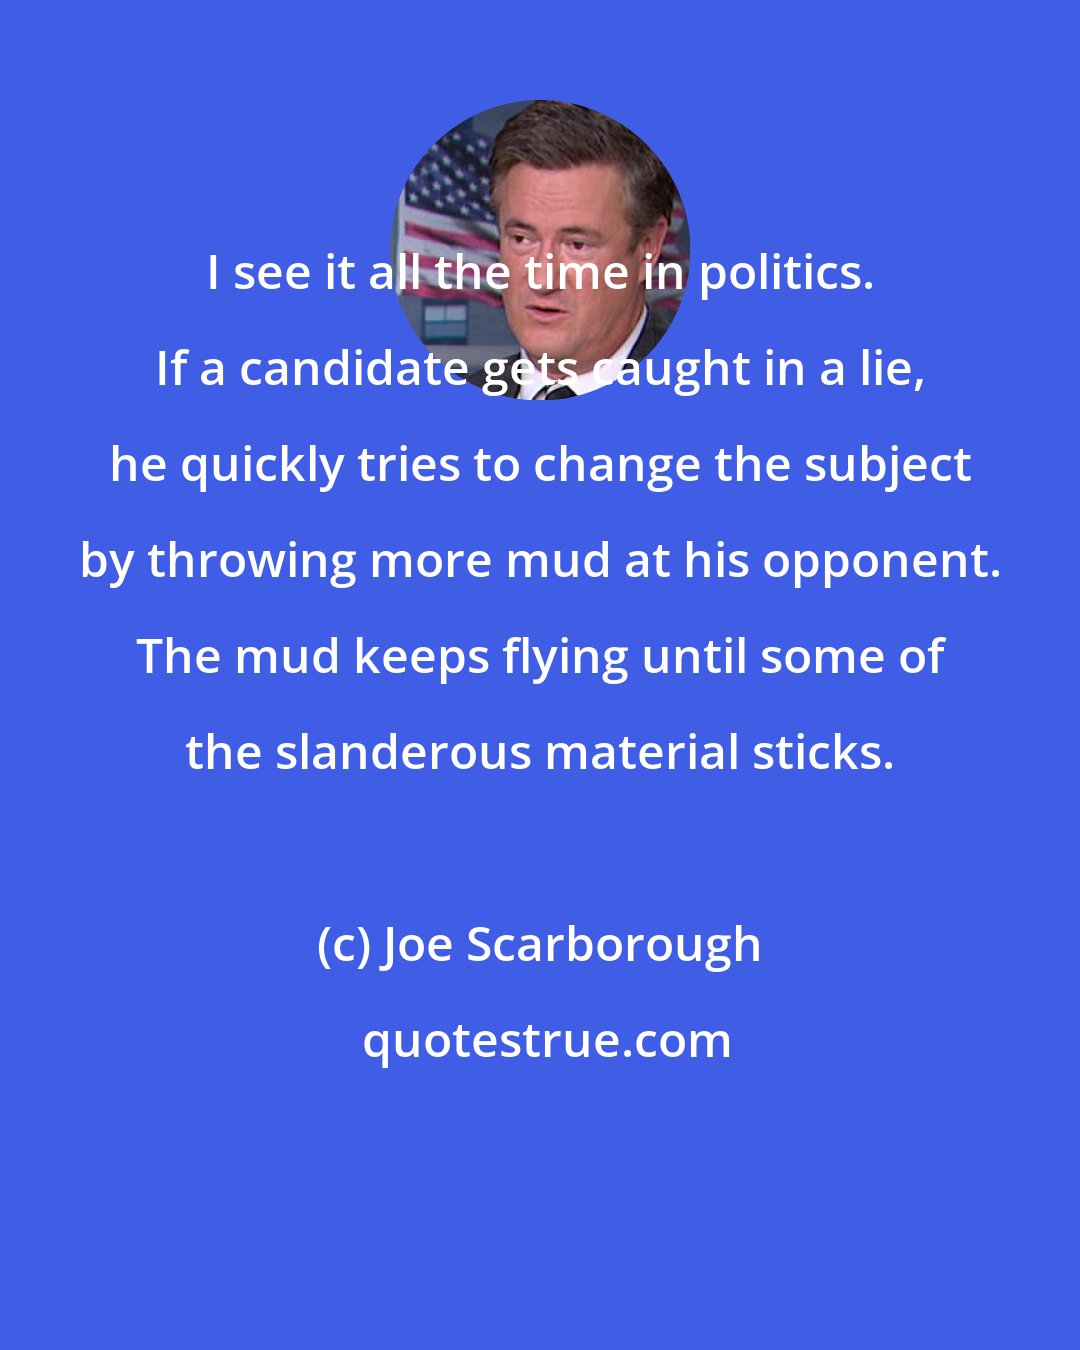 Joe Scarborough: I see it all the time in politics. If a candidate gets caught in a lie, he quickly tries to change the subject by throwing more mud at his opponent. The mud keeps flying until some of the slanderous material sticks.